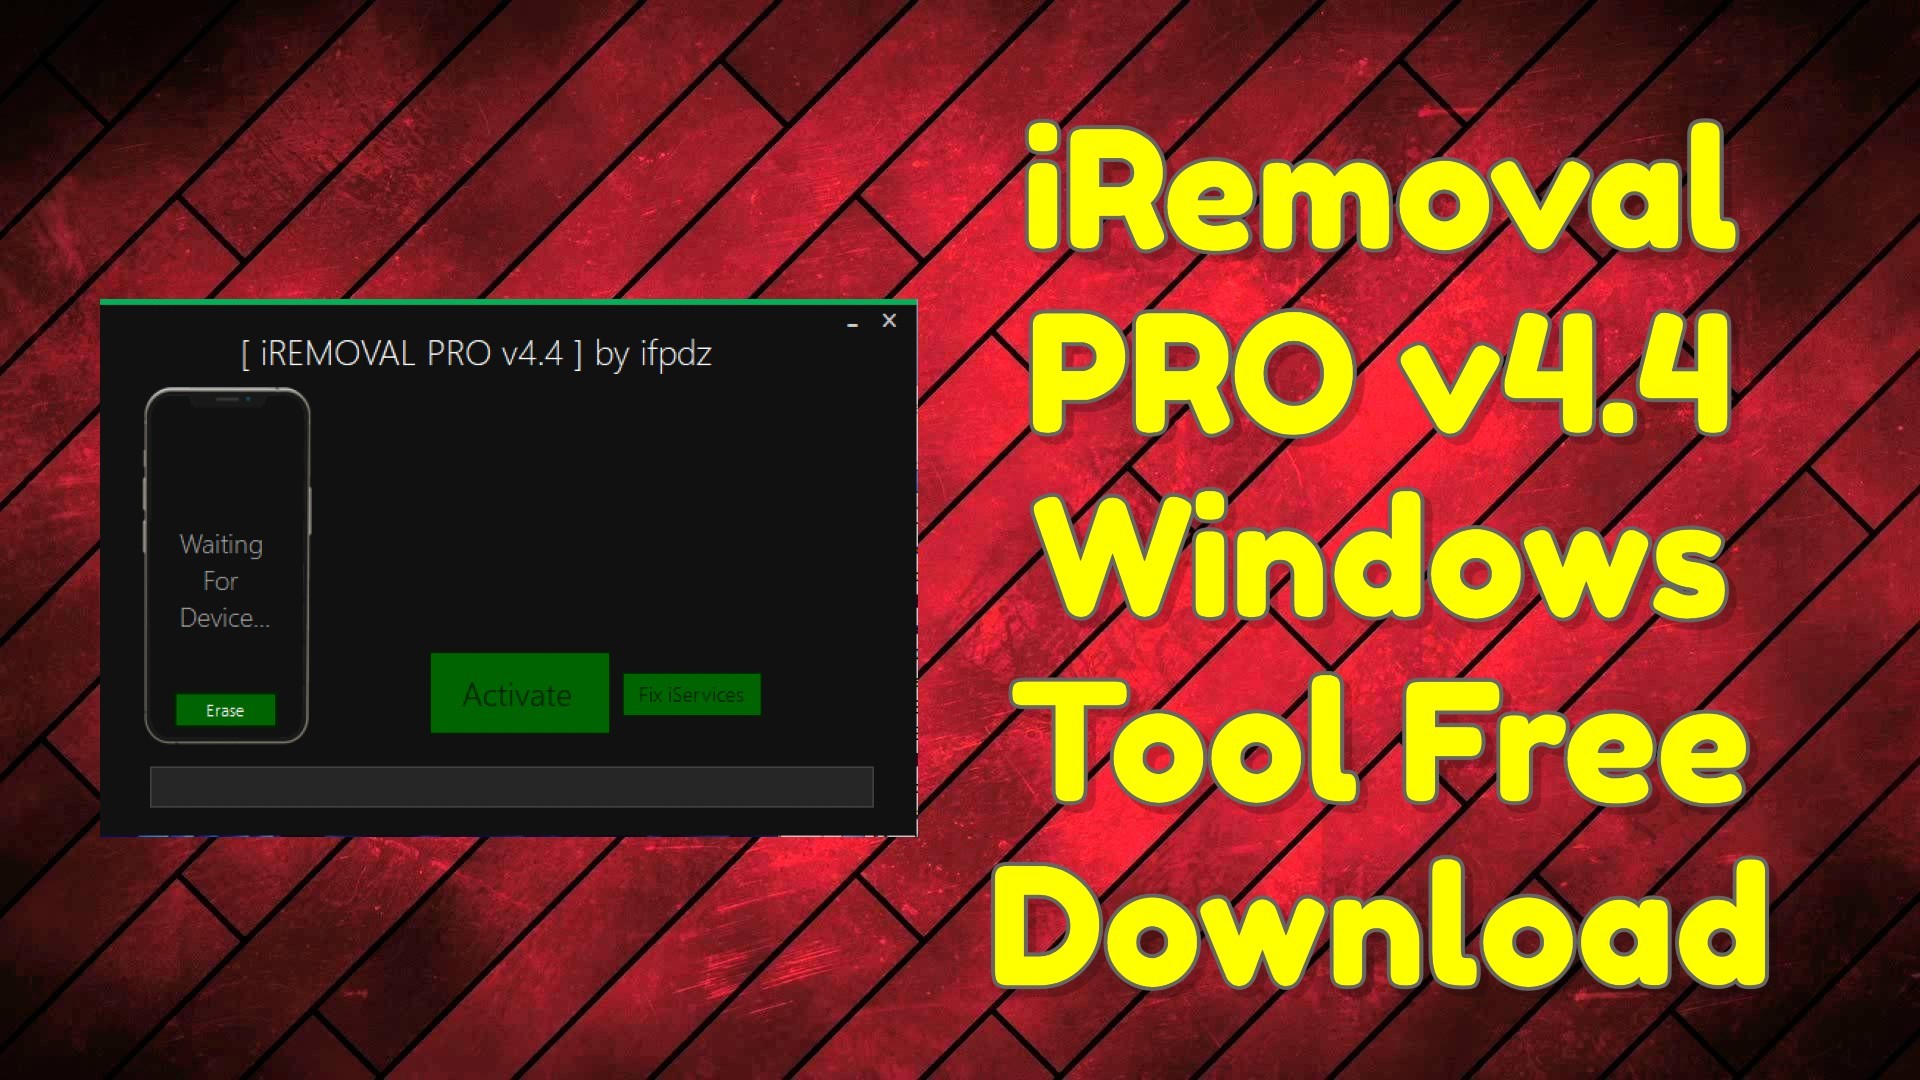 iremoval pro free download windows 10